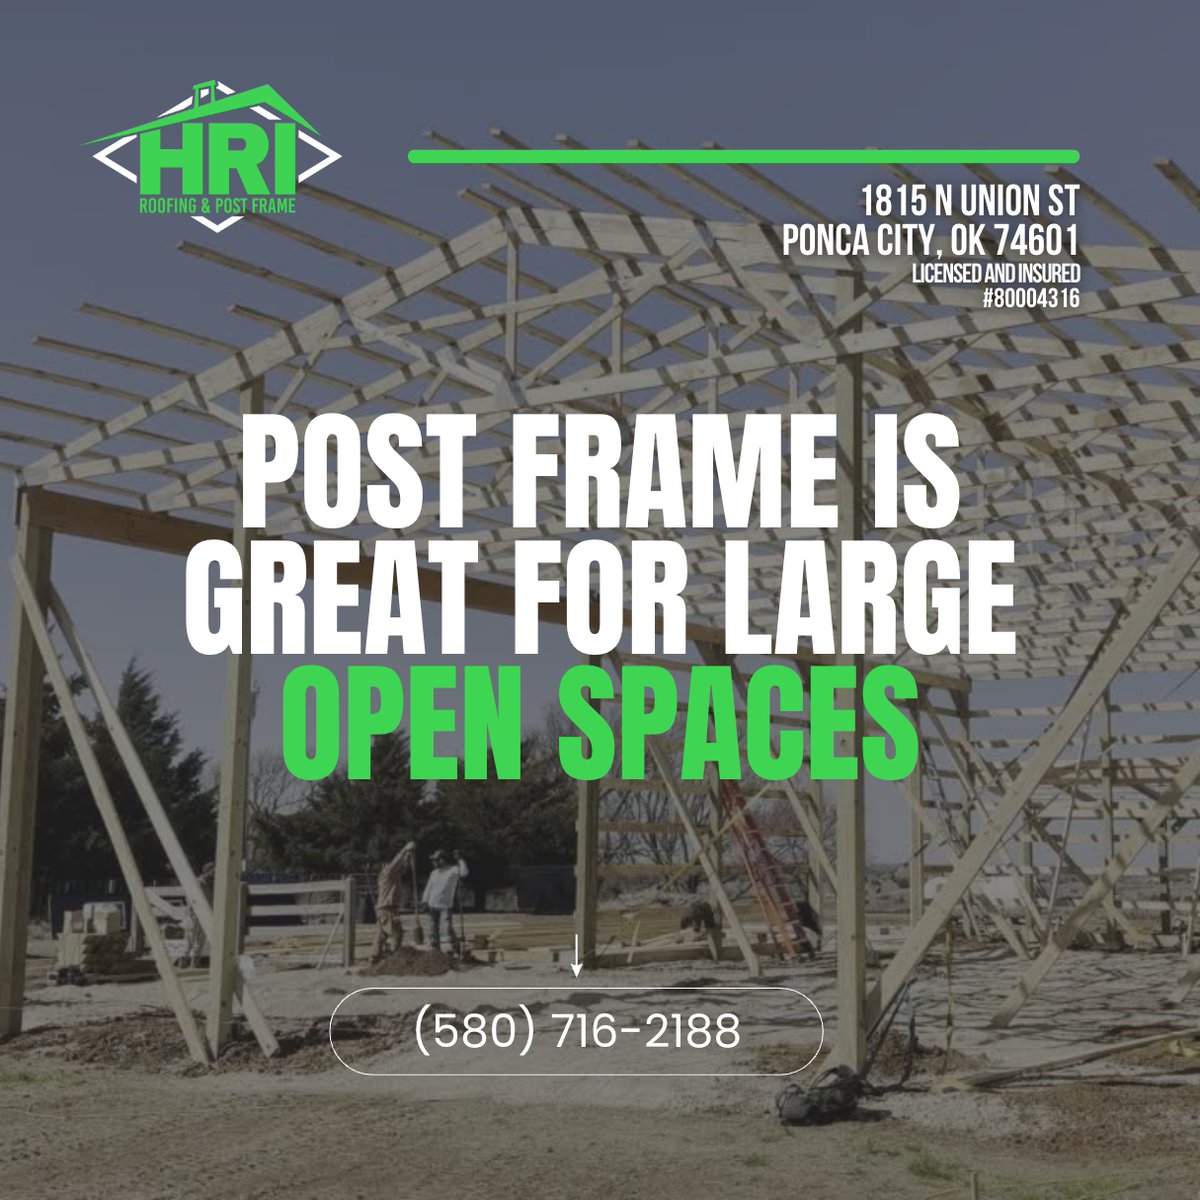 Looking to create large open spaces for your project? Post frame construction is the answer. With sturdy posts as primary support, no interior load-bearing walls are needed, giving you versatile and customizable spaces. #PostFrameConstruction #VersatileSpaces #HRI